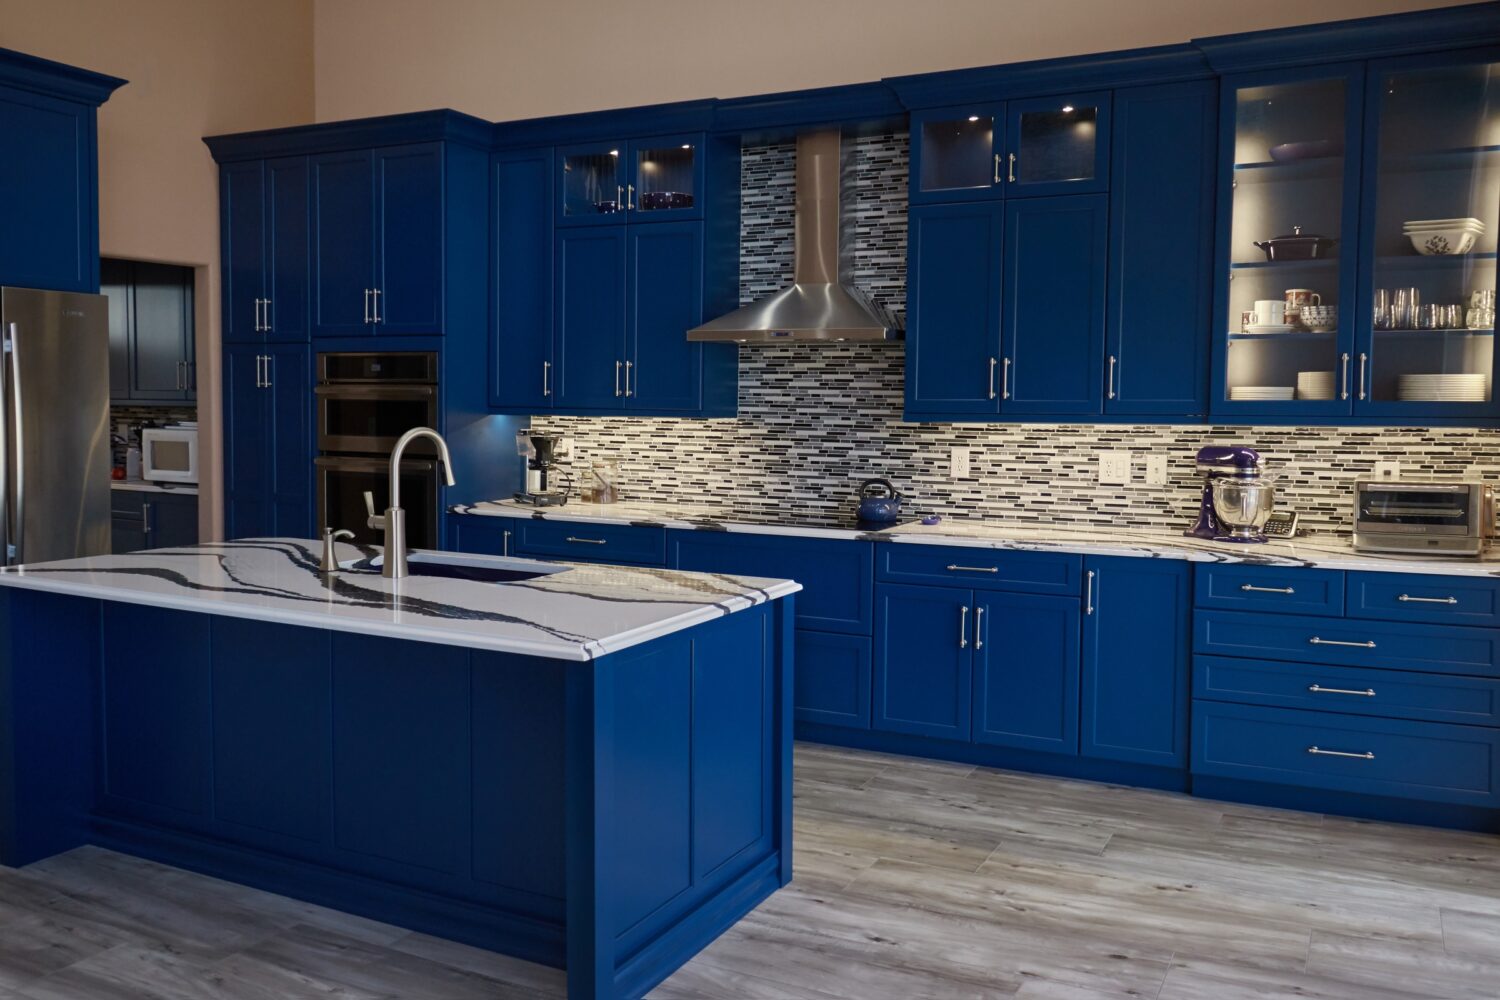 A Bright, Blue Show-Stopping Kitchen - Dura Supreme Cabinetry